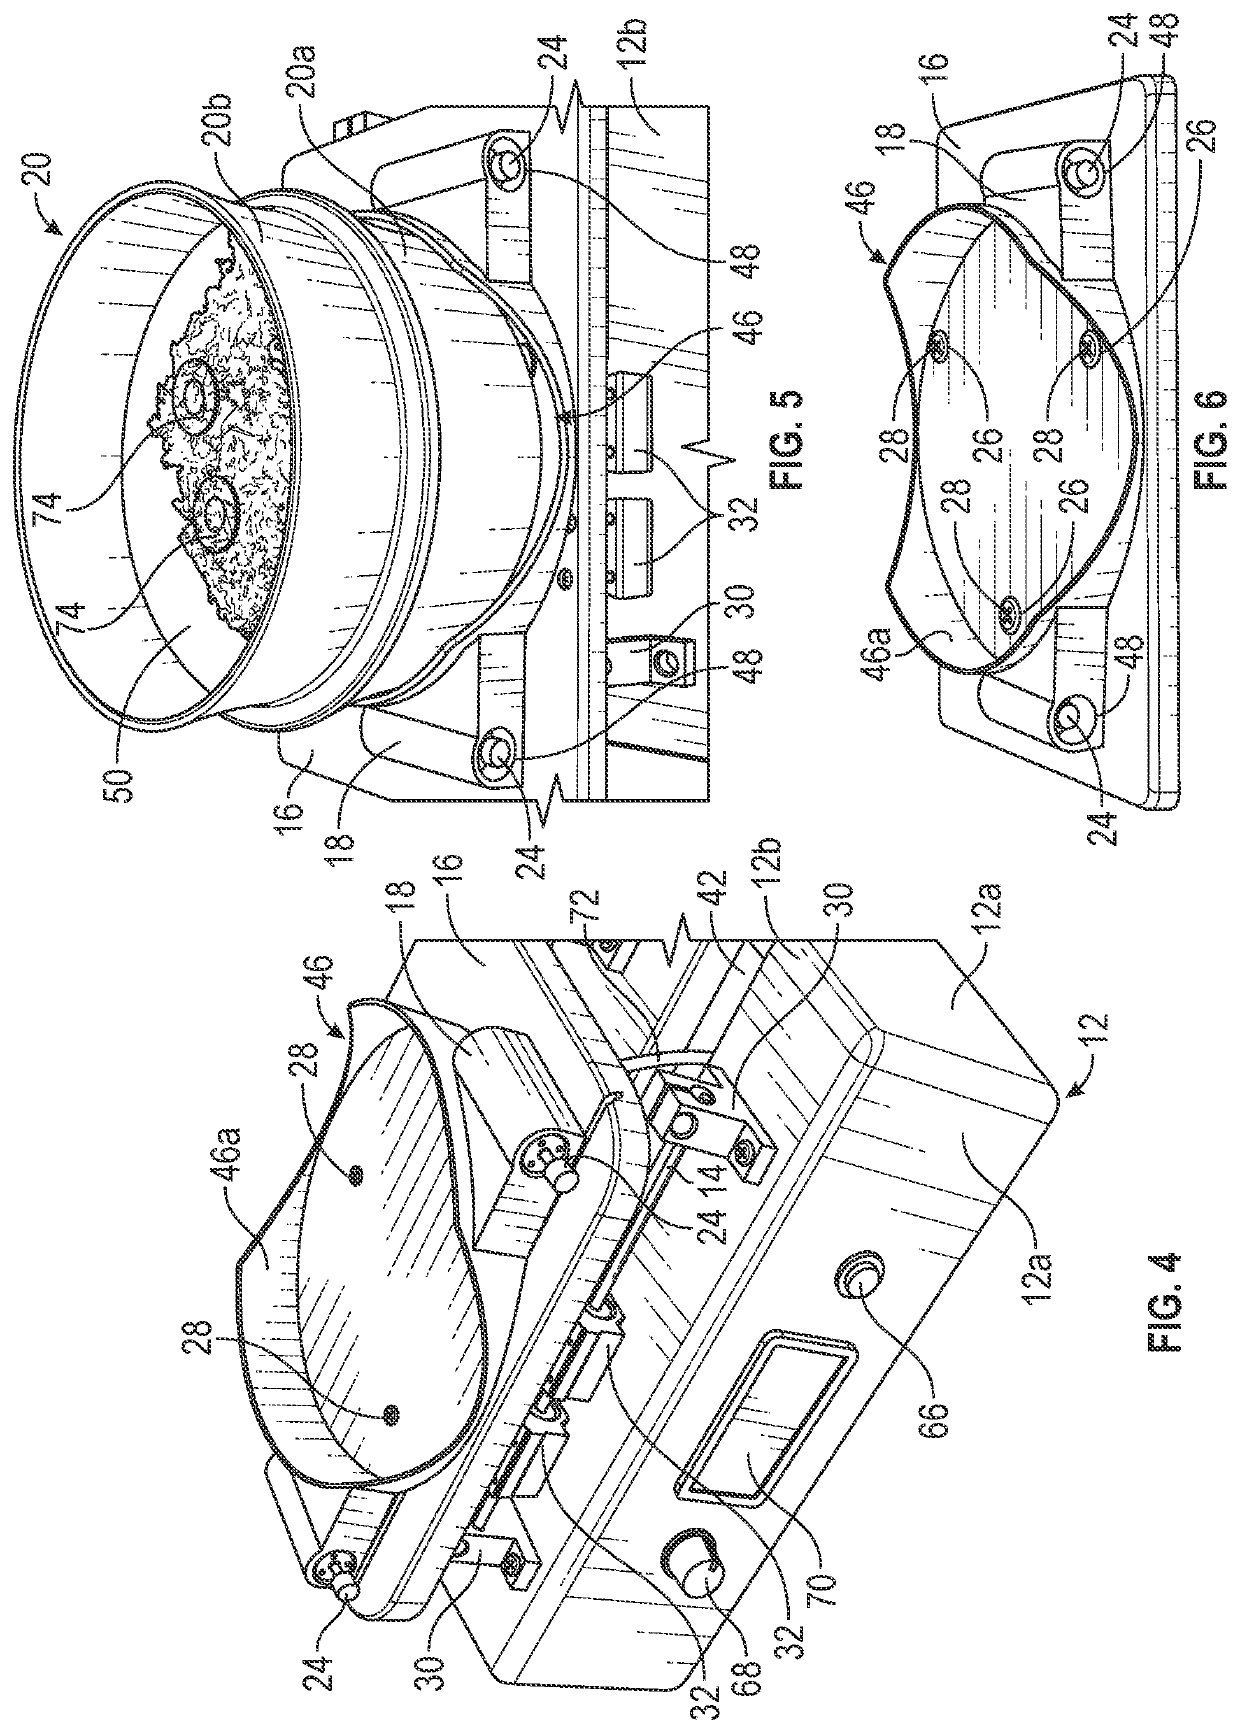 Plant product extraction apparatus